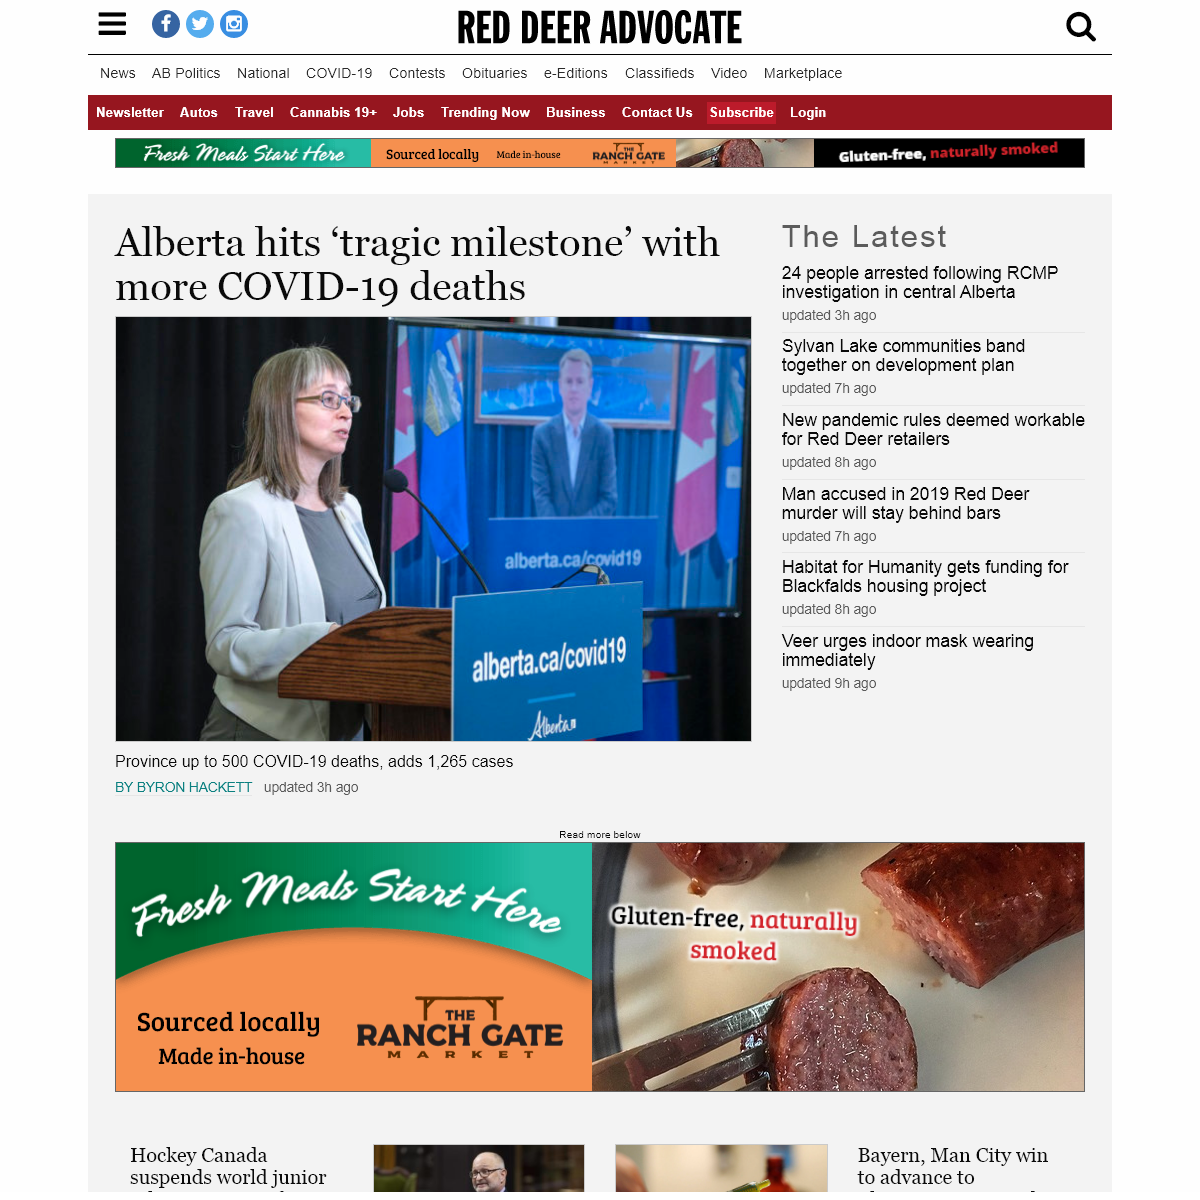 Red Deer Advocate â€“ Get breaking Red Deer news now. Click here for daily stories and in-depth analysis on business, sports, ar